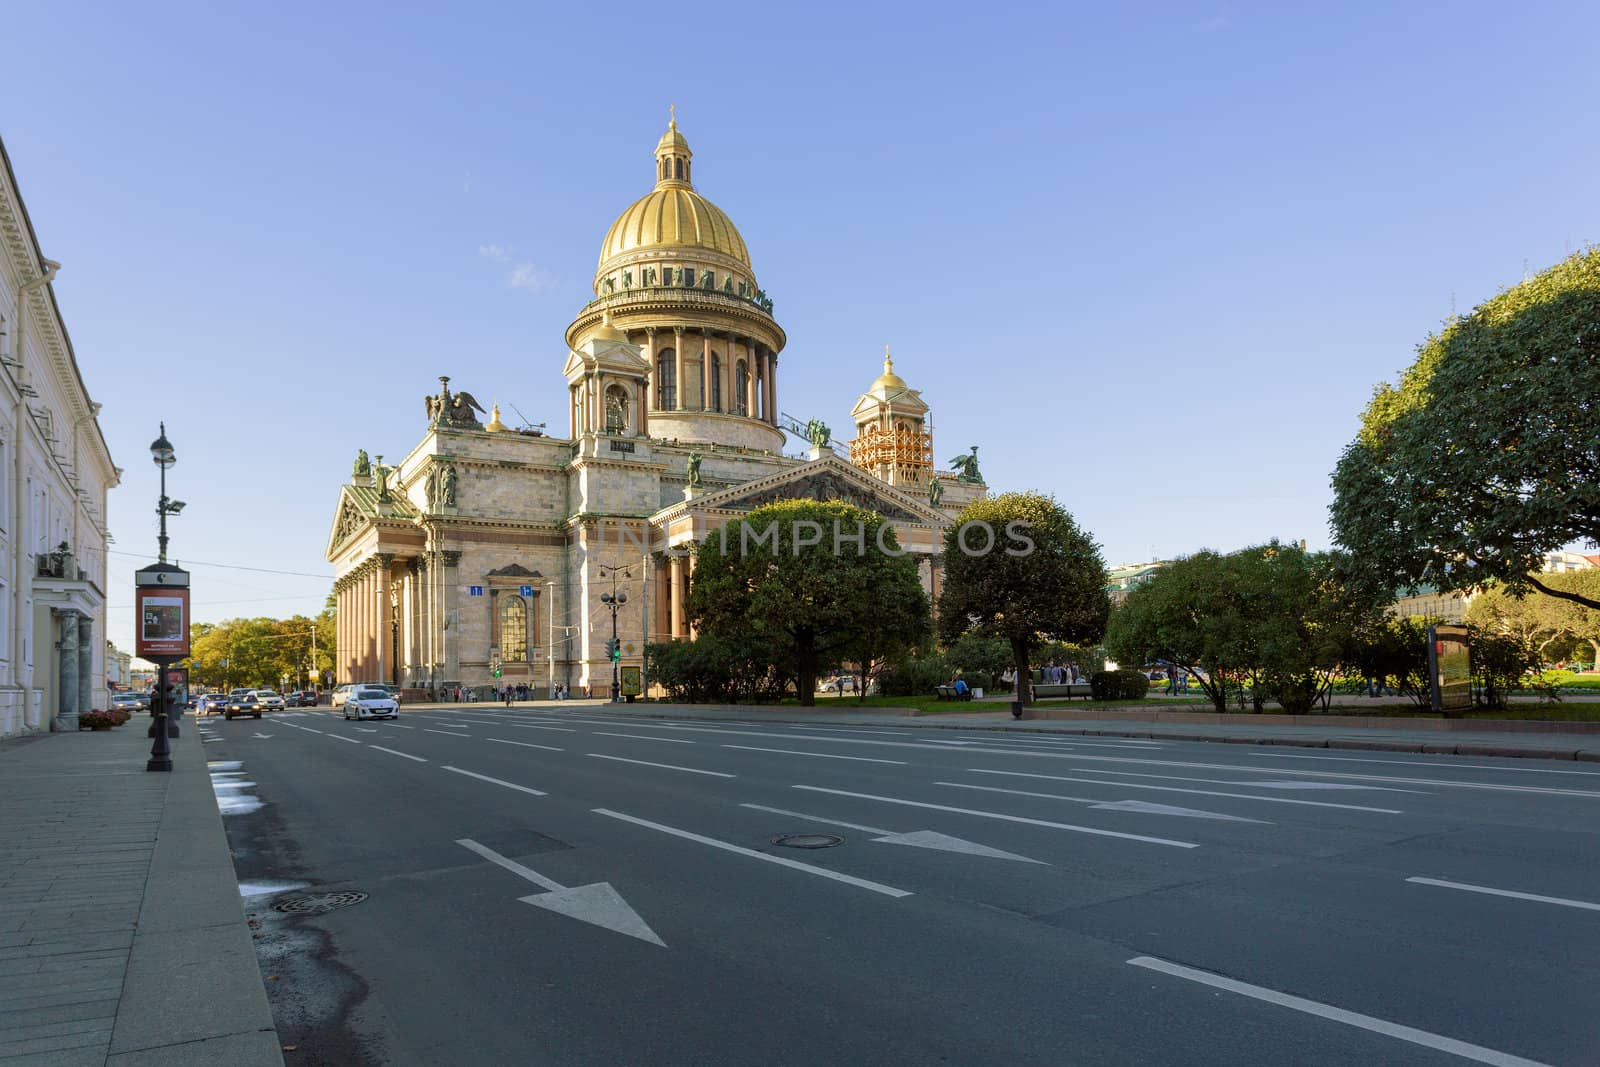 Isaac s Cathedral in St. Petersburg , Russia